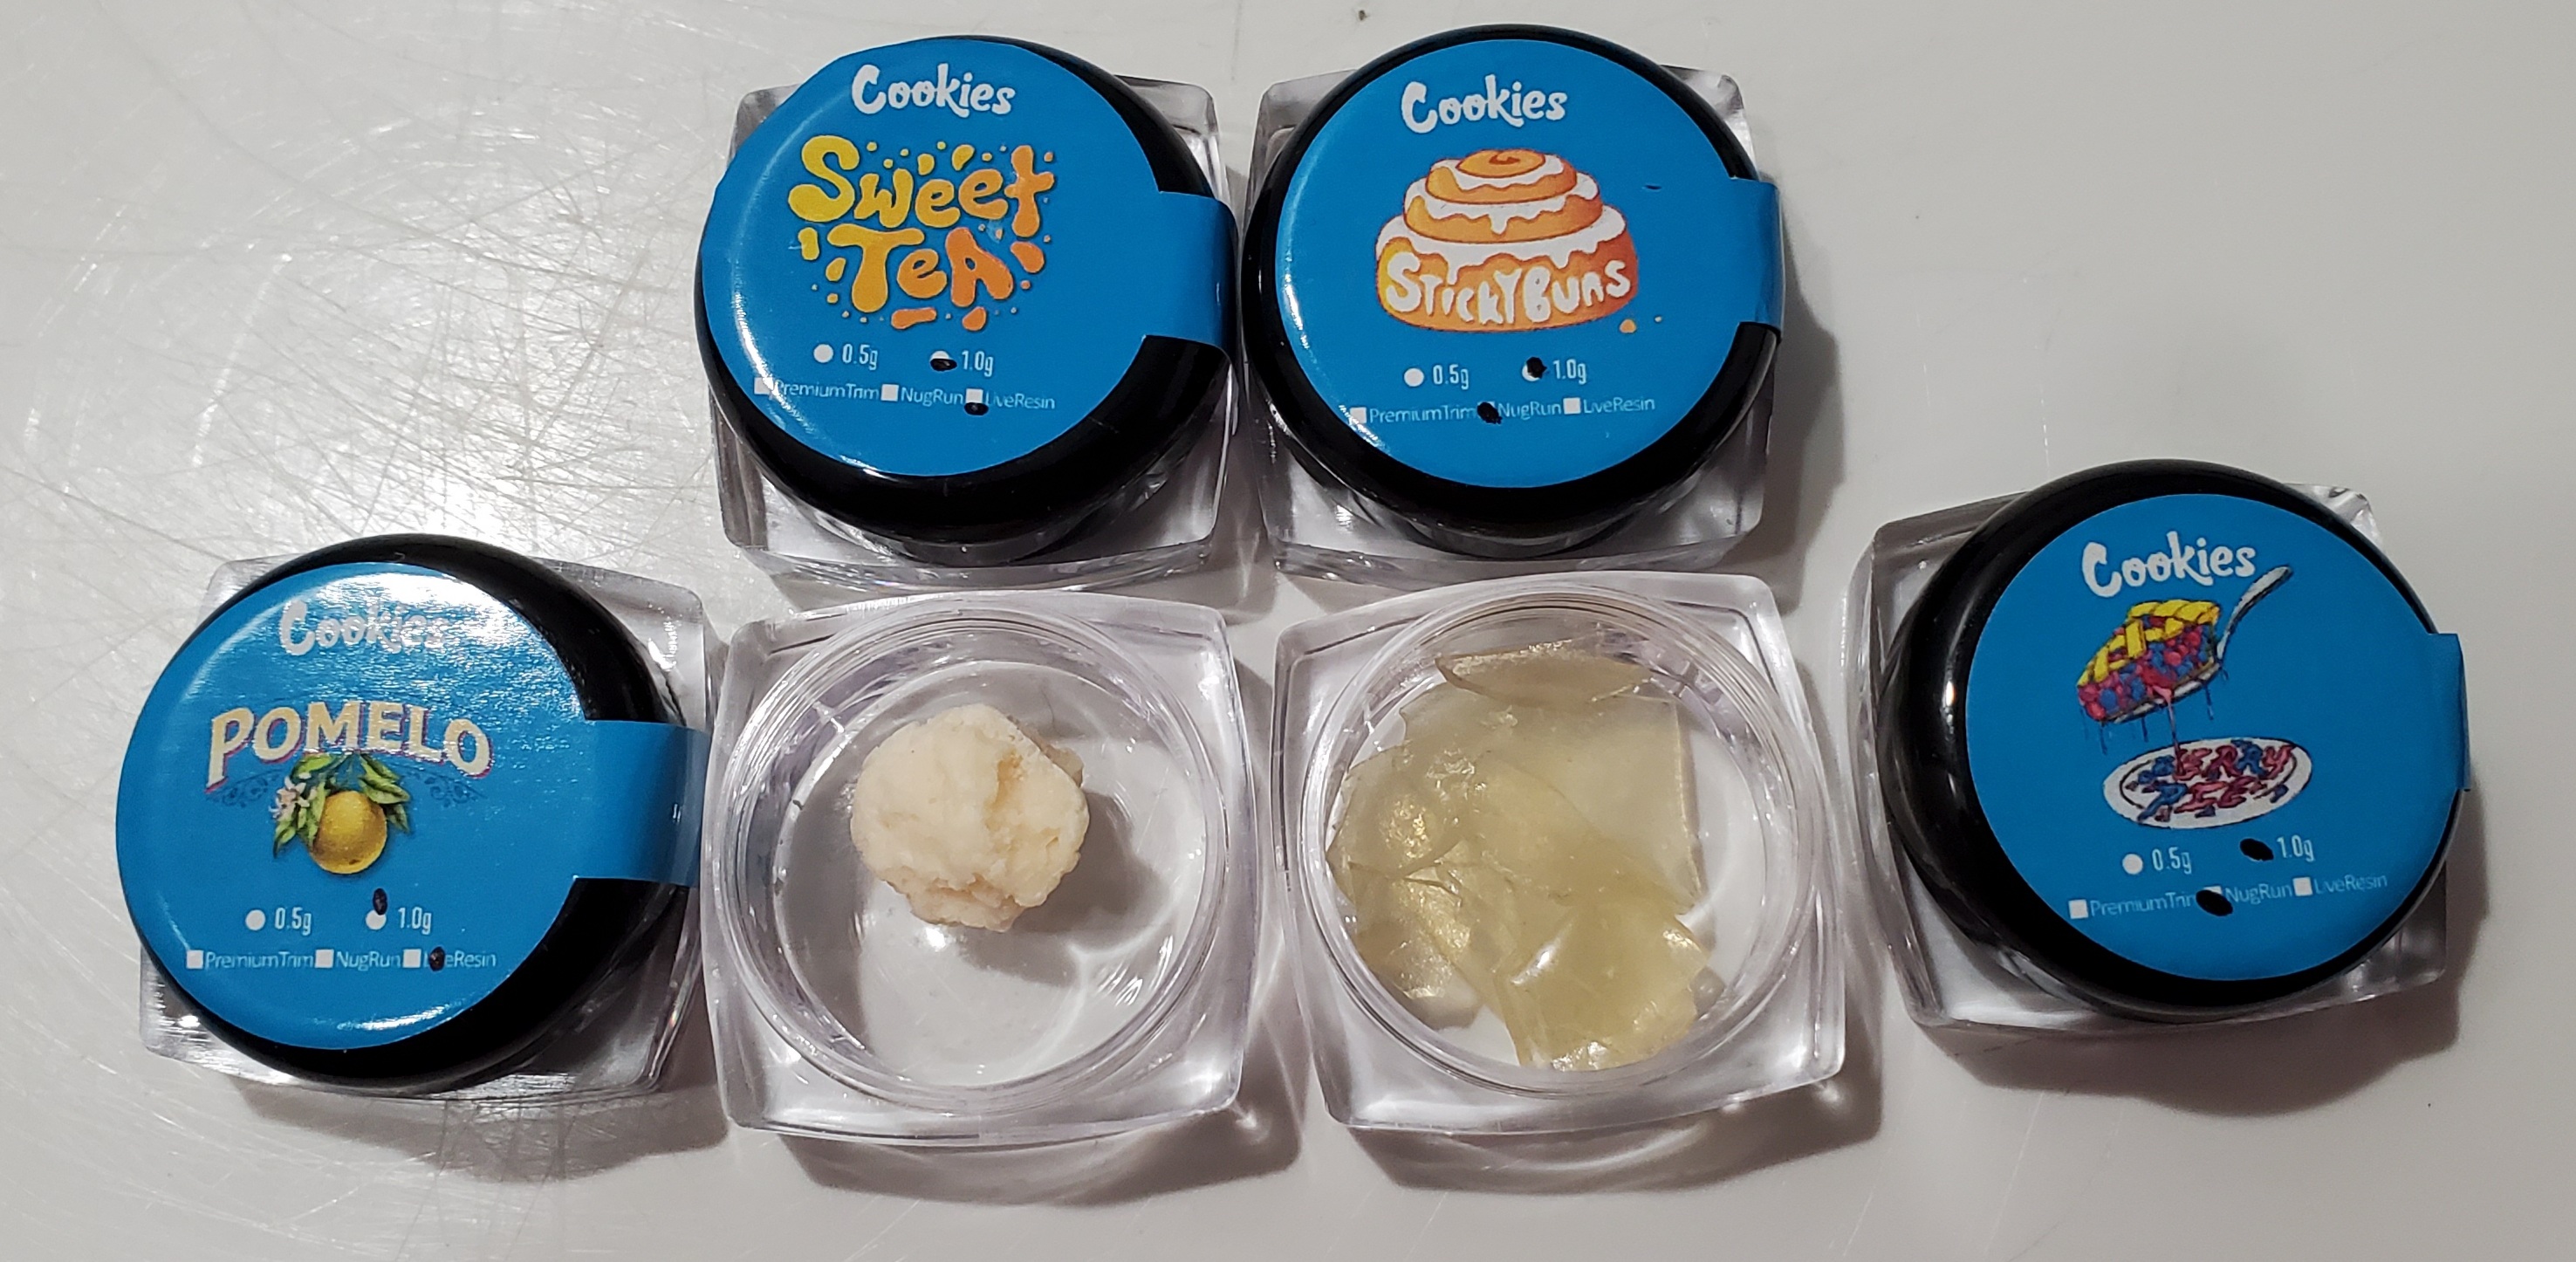 shatter wax and crumble